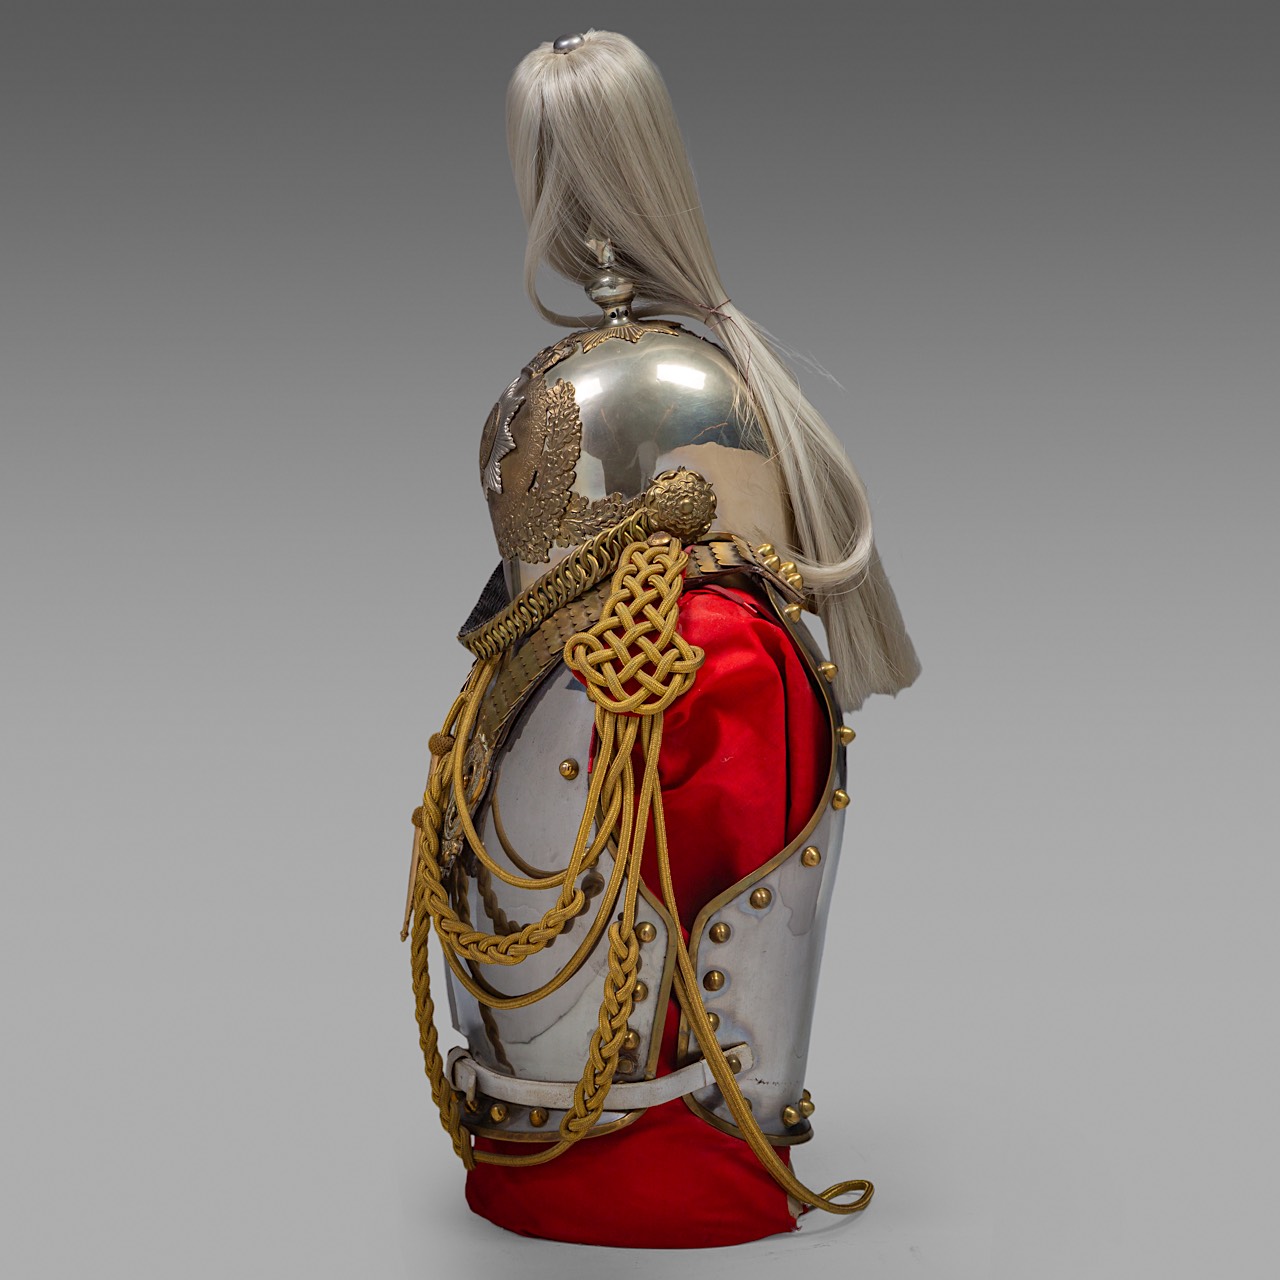 cuirass and helmet of the Royal Horse guards, metal and brass,1952 (Eliabeth II) 88 x 36 x 44 cm. (3 - Image 3 of 6